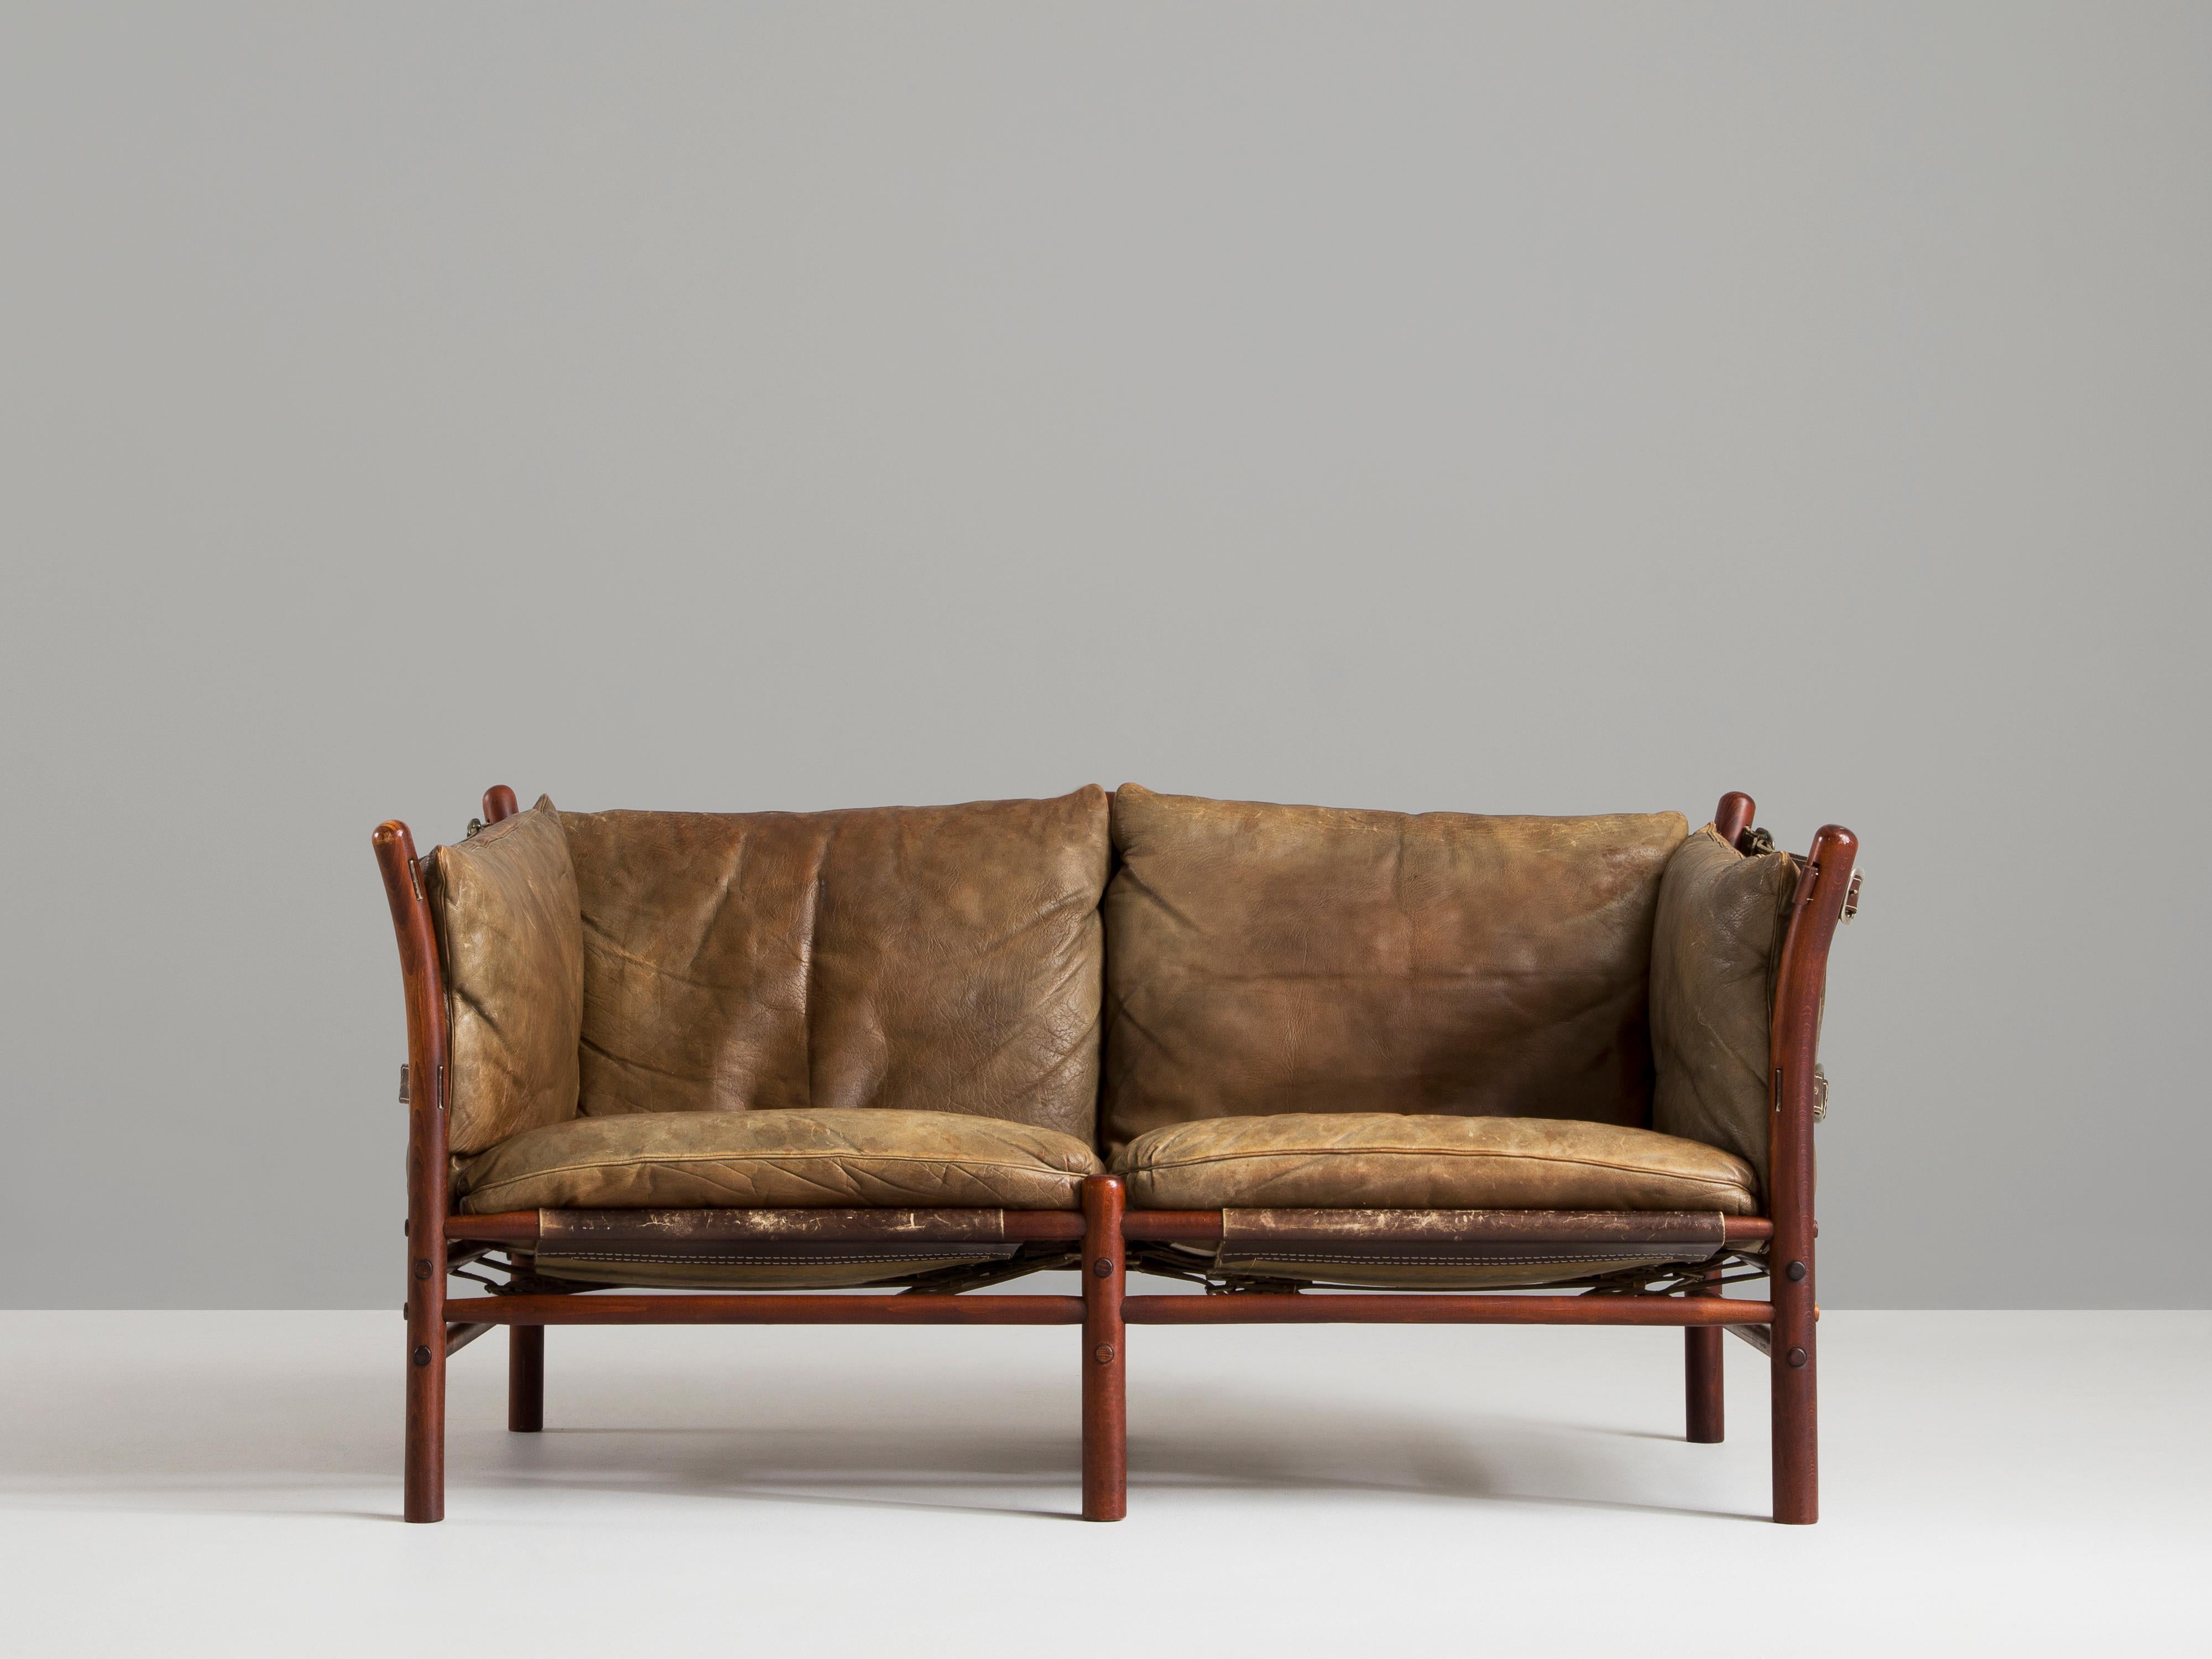 Arne Norell, sofa model ‘Illona’, leather, stained beech, Sweden, 1960s

The two-seat sofa ‘Illona’ was designed by Arne Norell. The wooden frame in stained beech is characterized by the circular diameters of the woods. The clear and strong lines